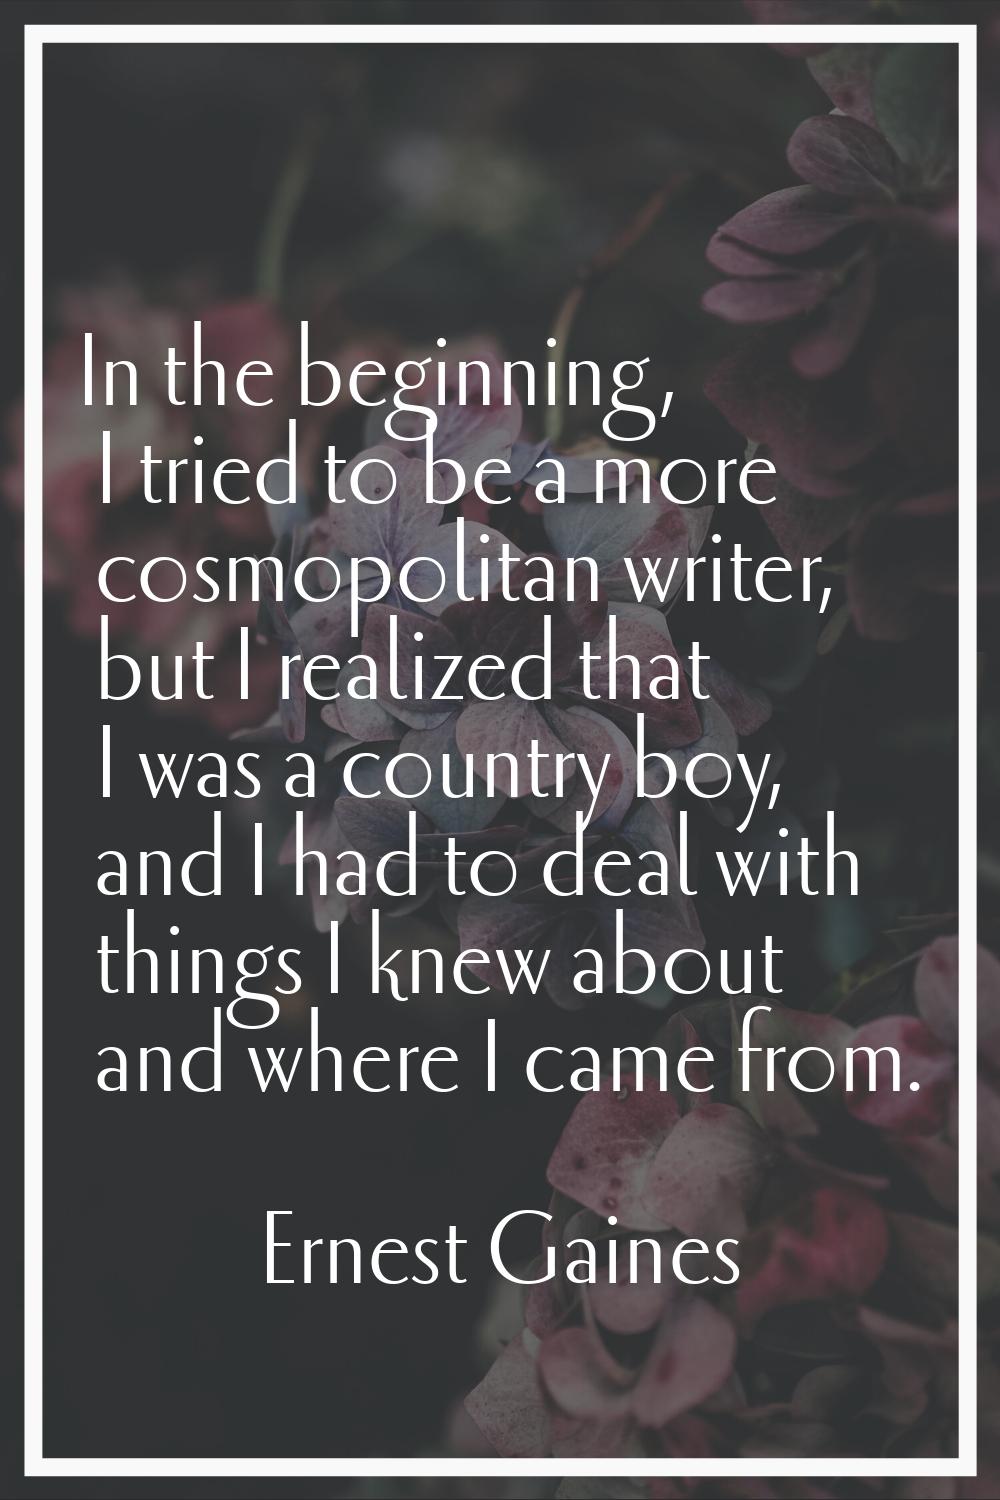 In the beginning, I tried to be a more cosmopolitan writer, but I realized that I was a country boy